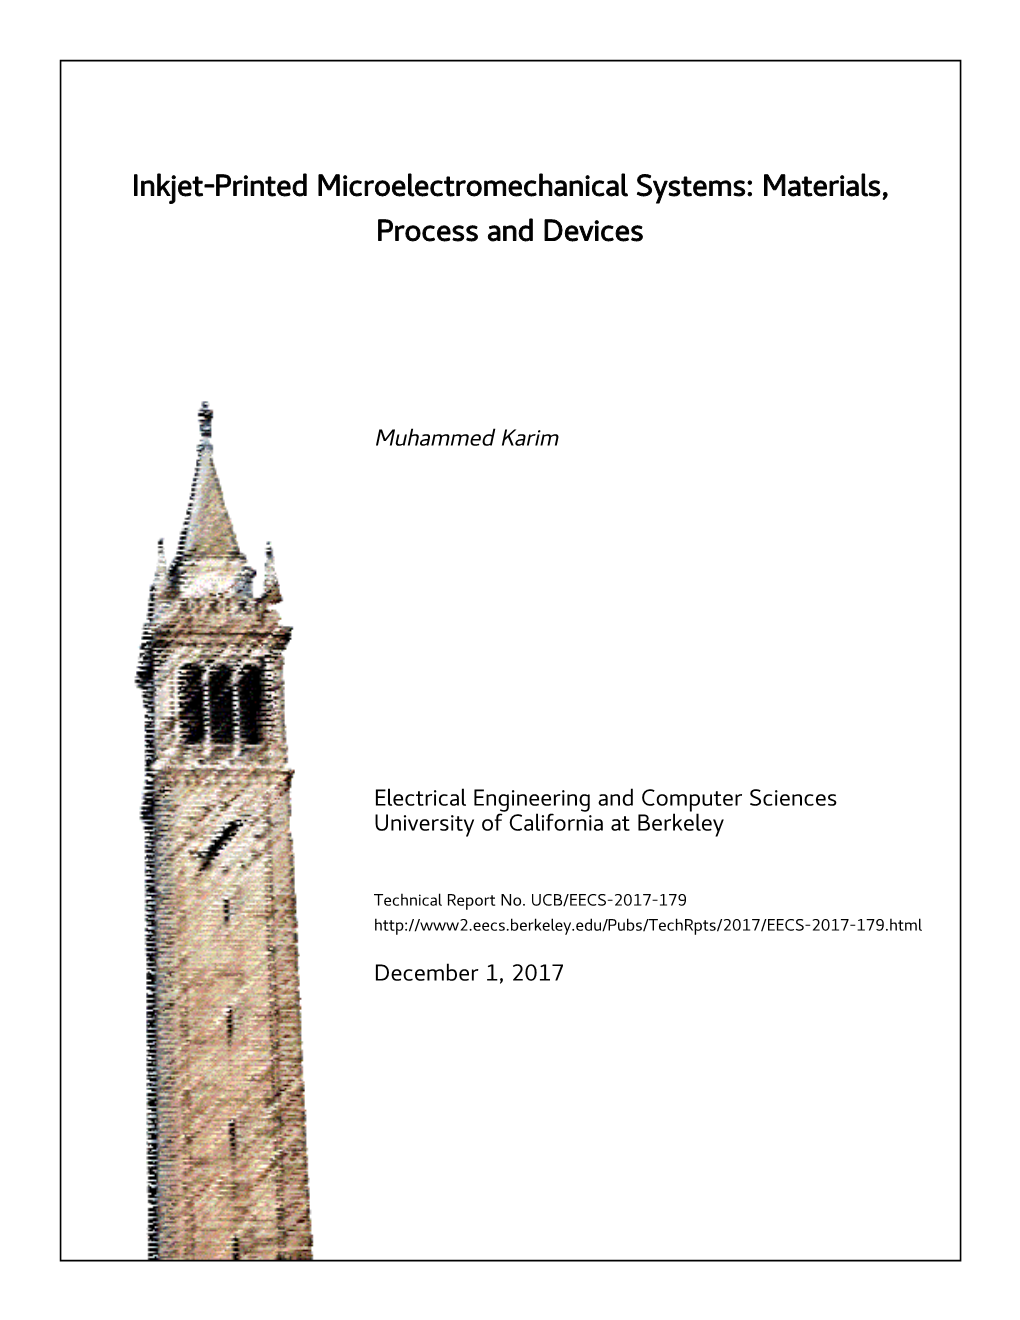 Inkjet-Printed Microelectromechanical Systems: Materials, Process and Devices